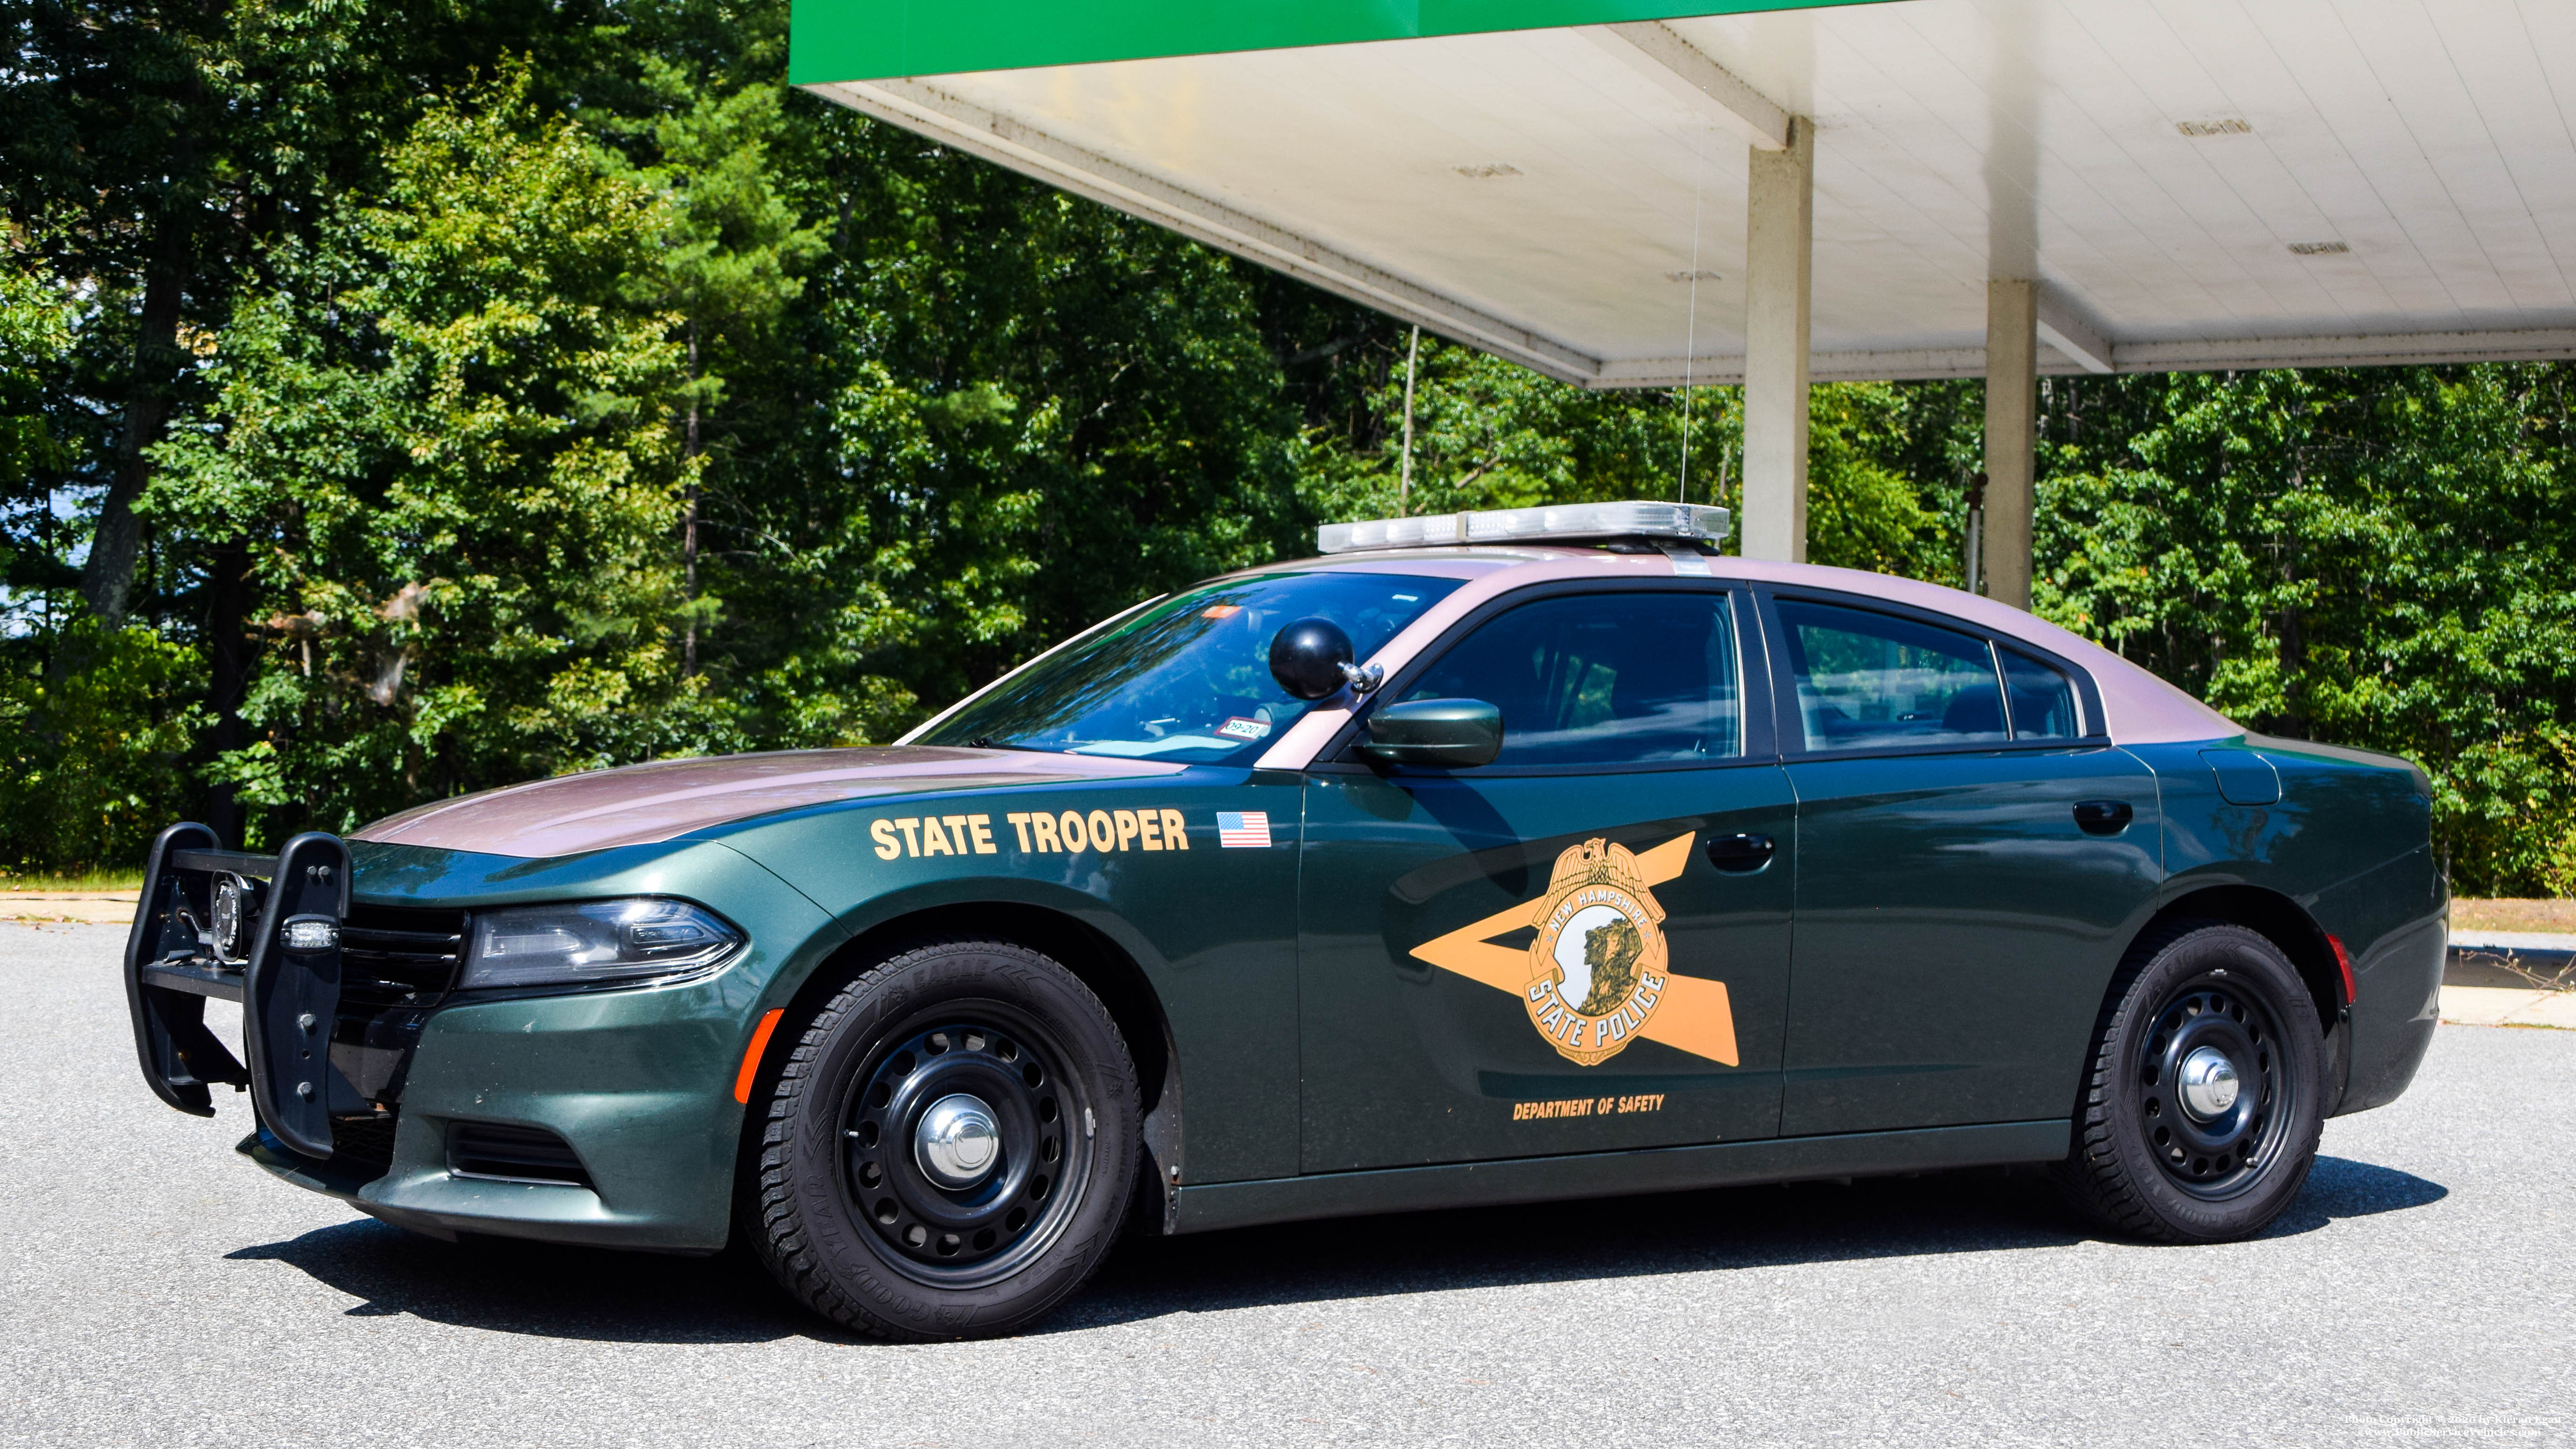 A photo  of New Hampshire State Police
            Cruiser 426, a 2015 Dodge Charger             taken by Kieran Egan